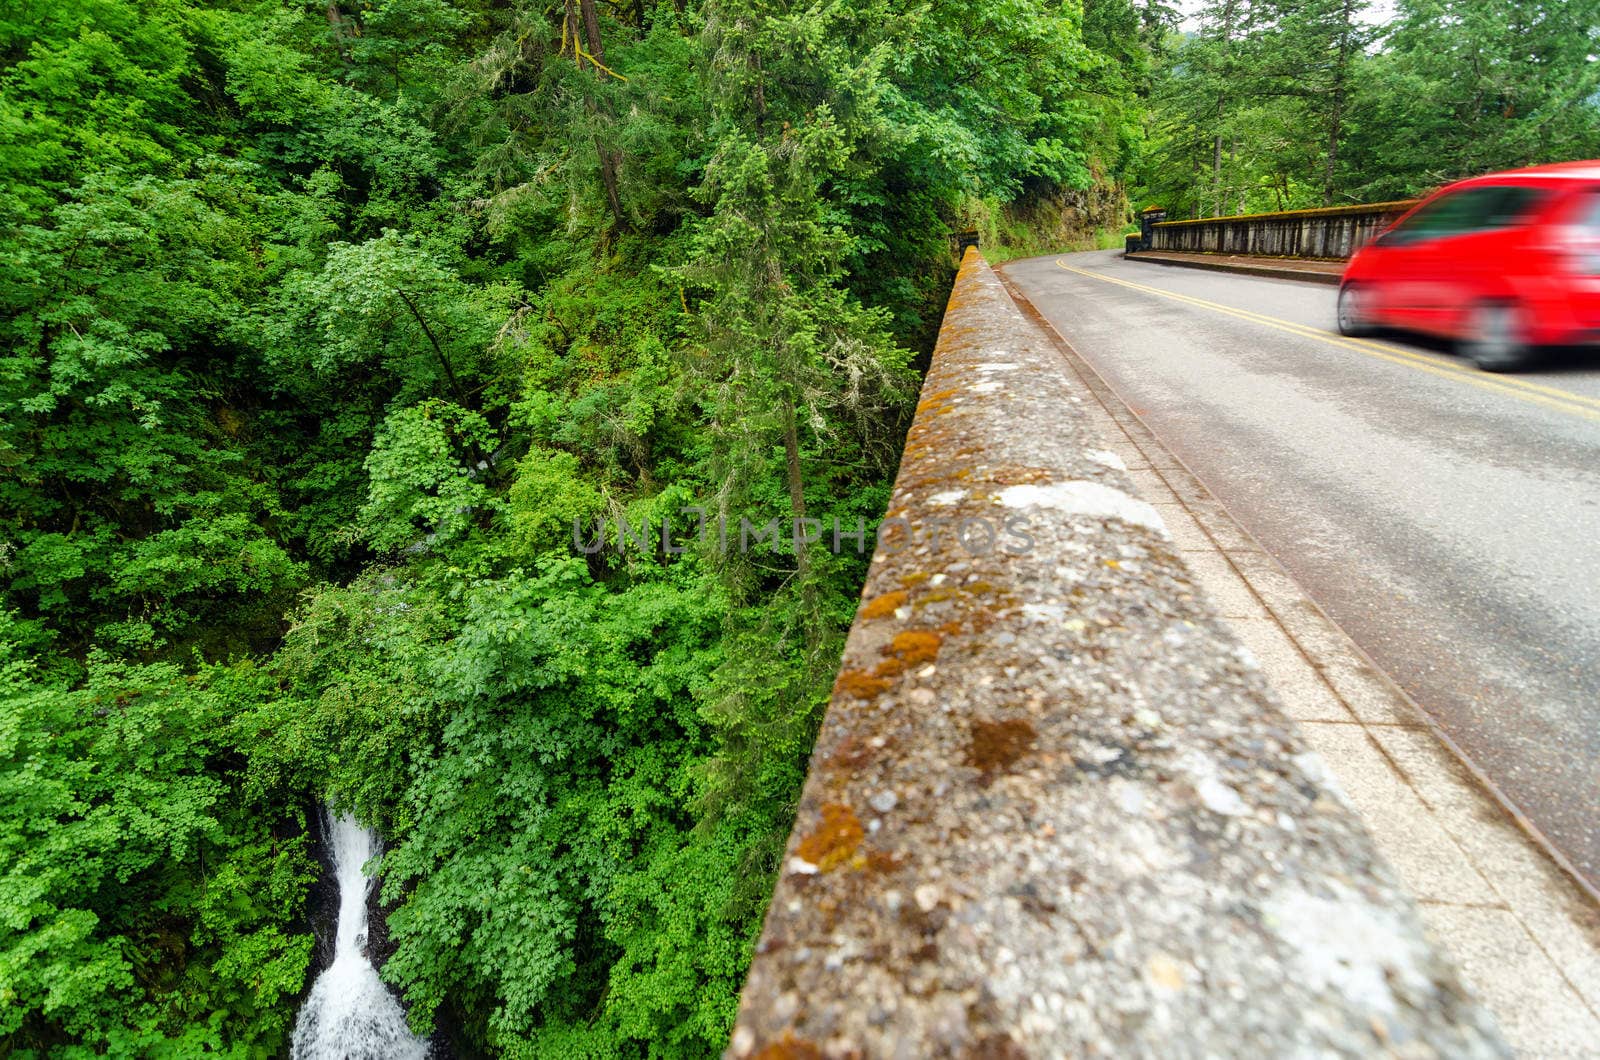 Waterfall in a lush green forest in Oregon next to historic Highway 30 with a red blurry car